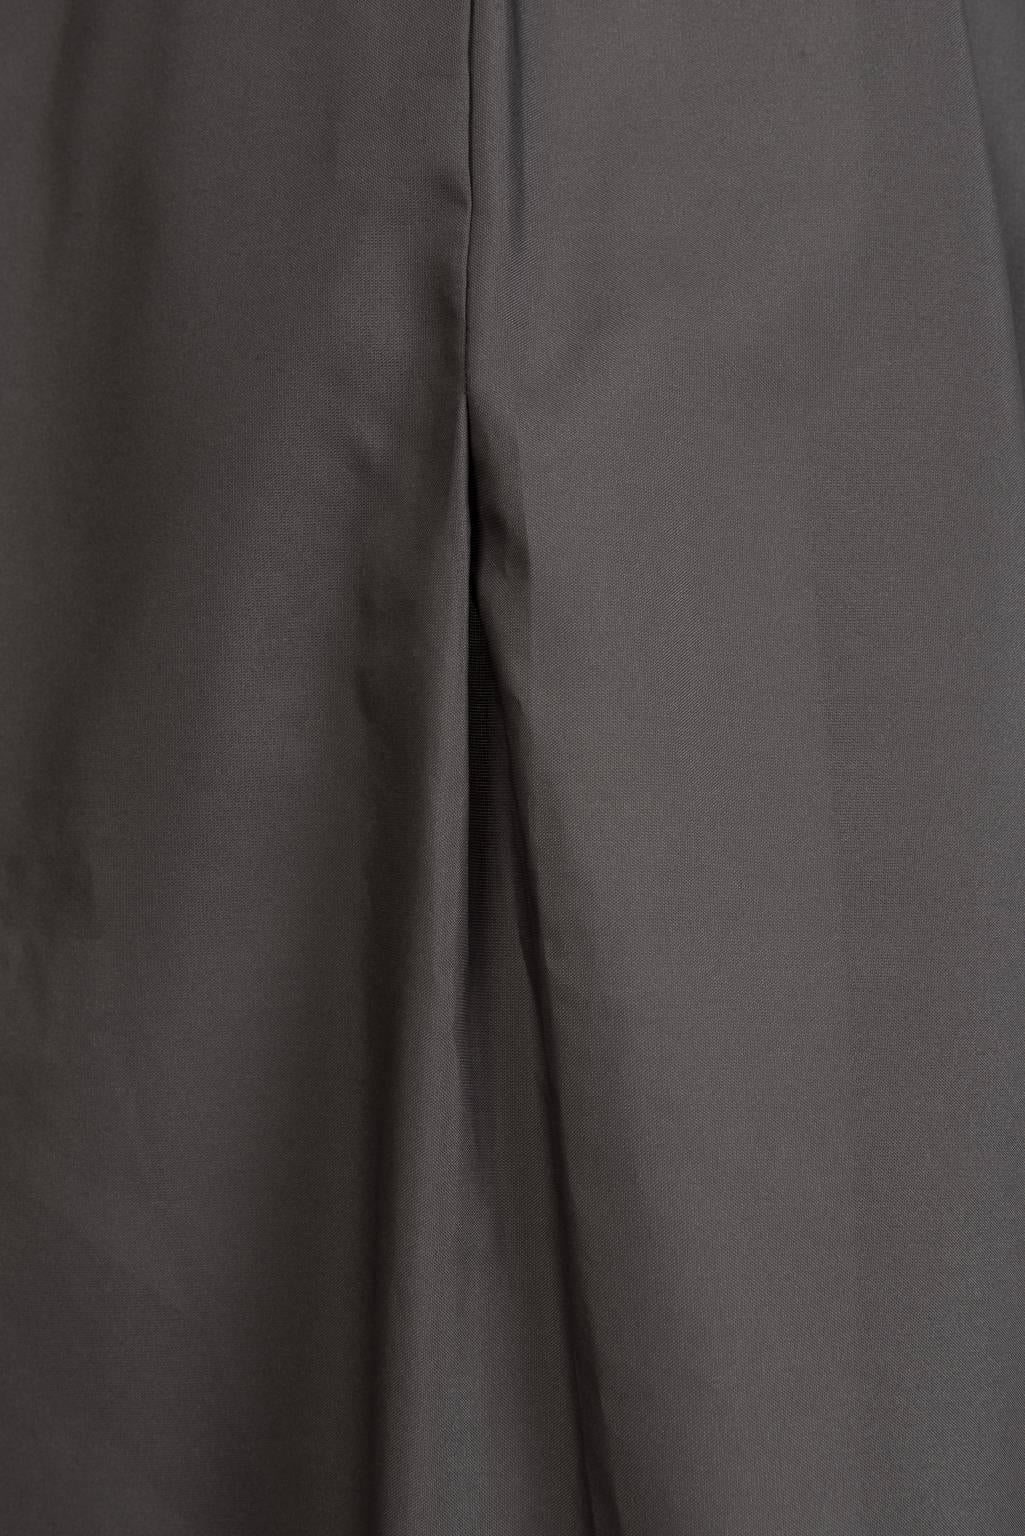 Issey Miyake Drop Crouch Pant For Sale 1